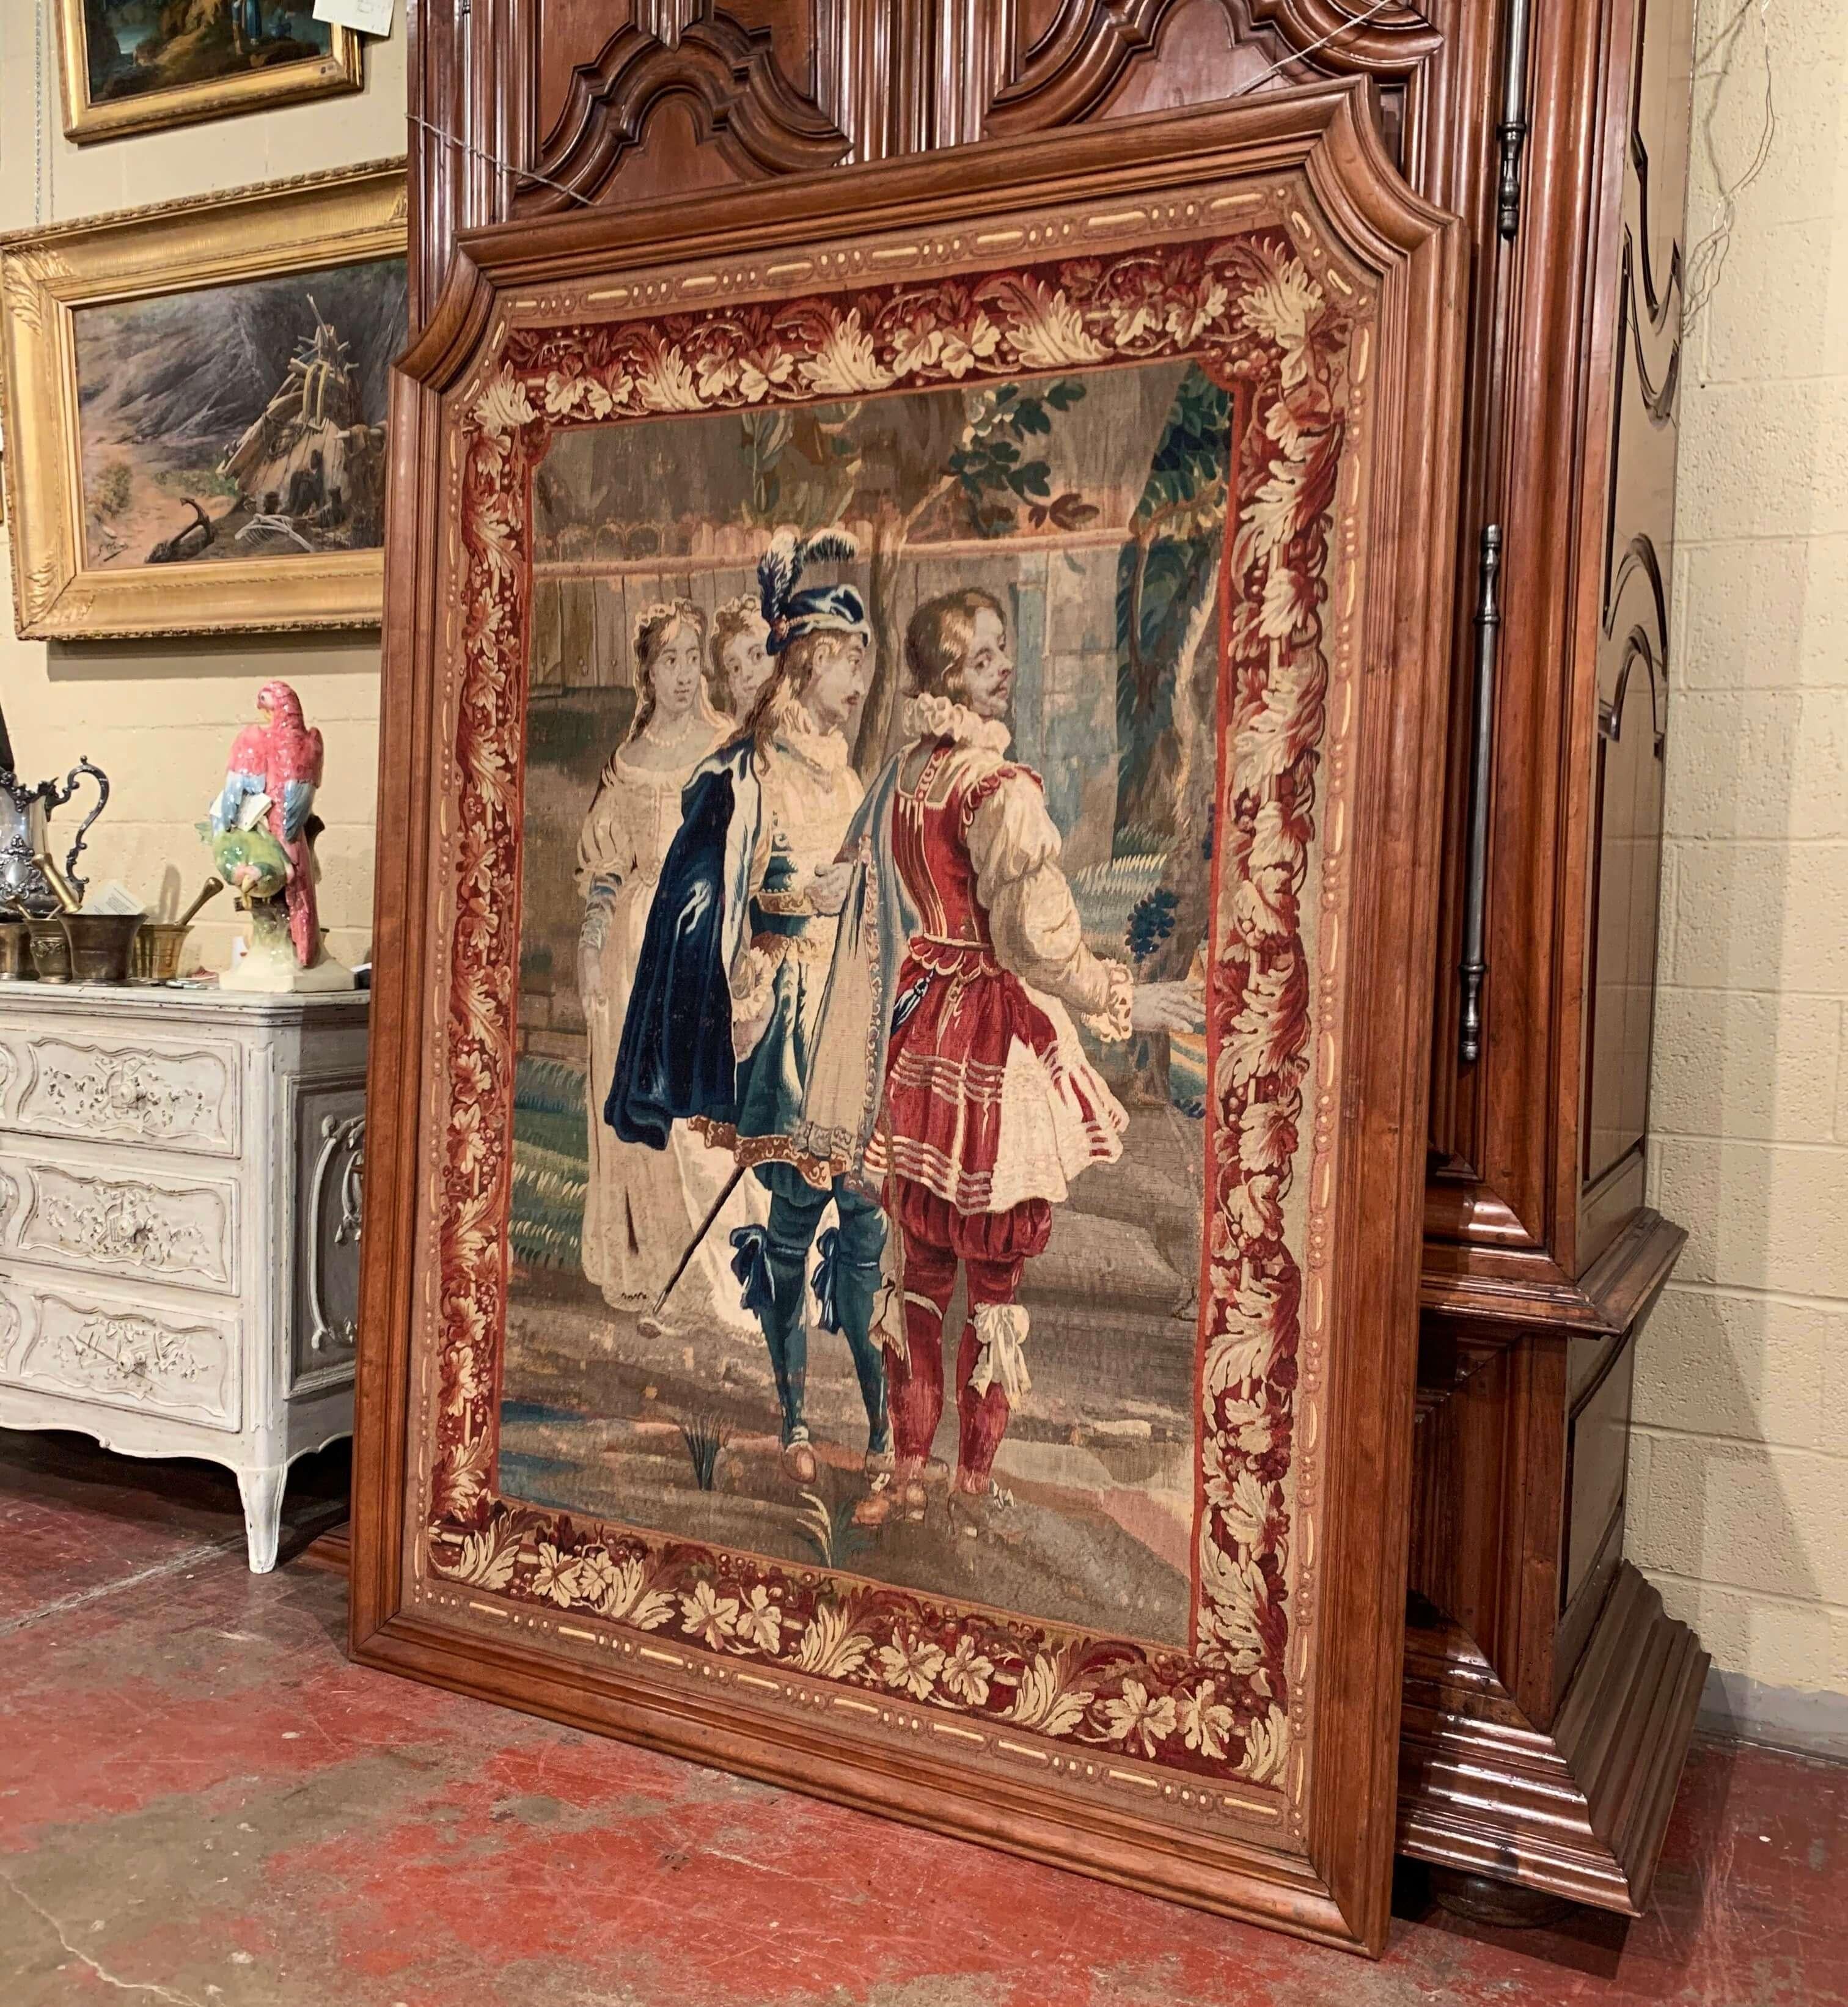 18th Century French Handwoven Aubusson Panel Tapestry in Original Oak Frame For Sale 4